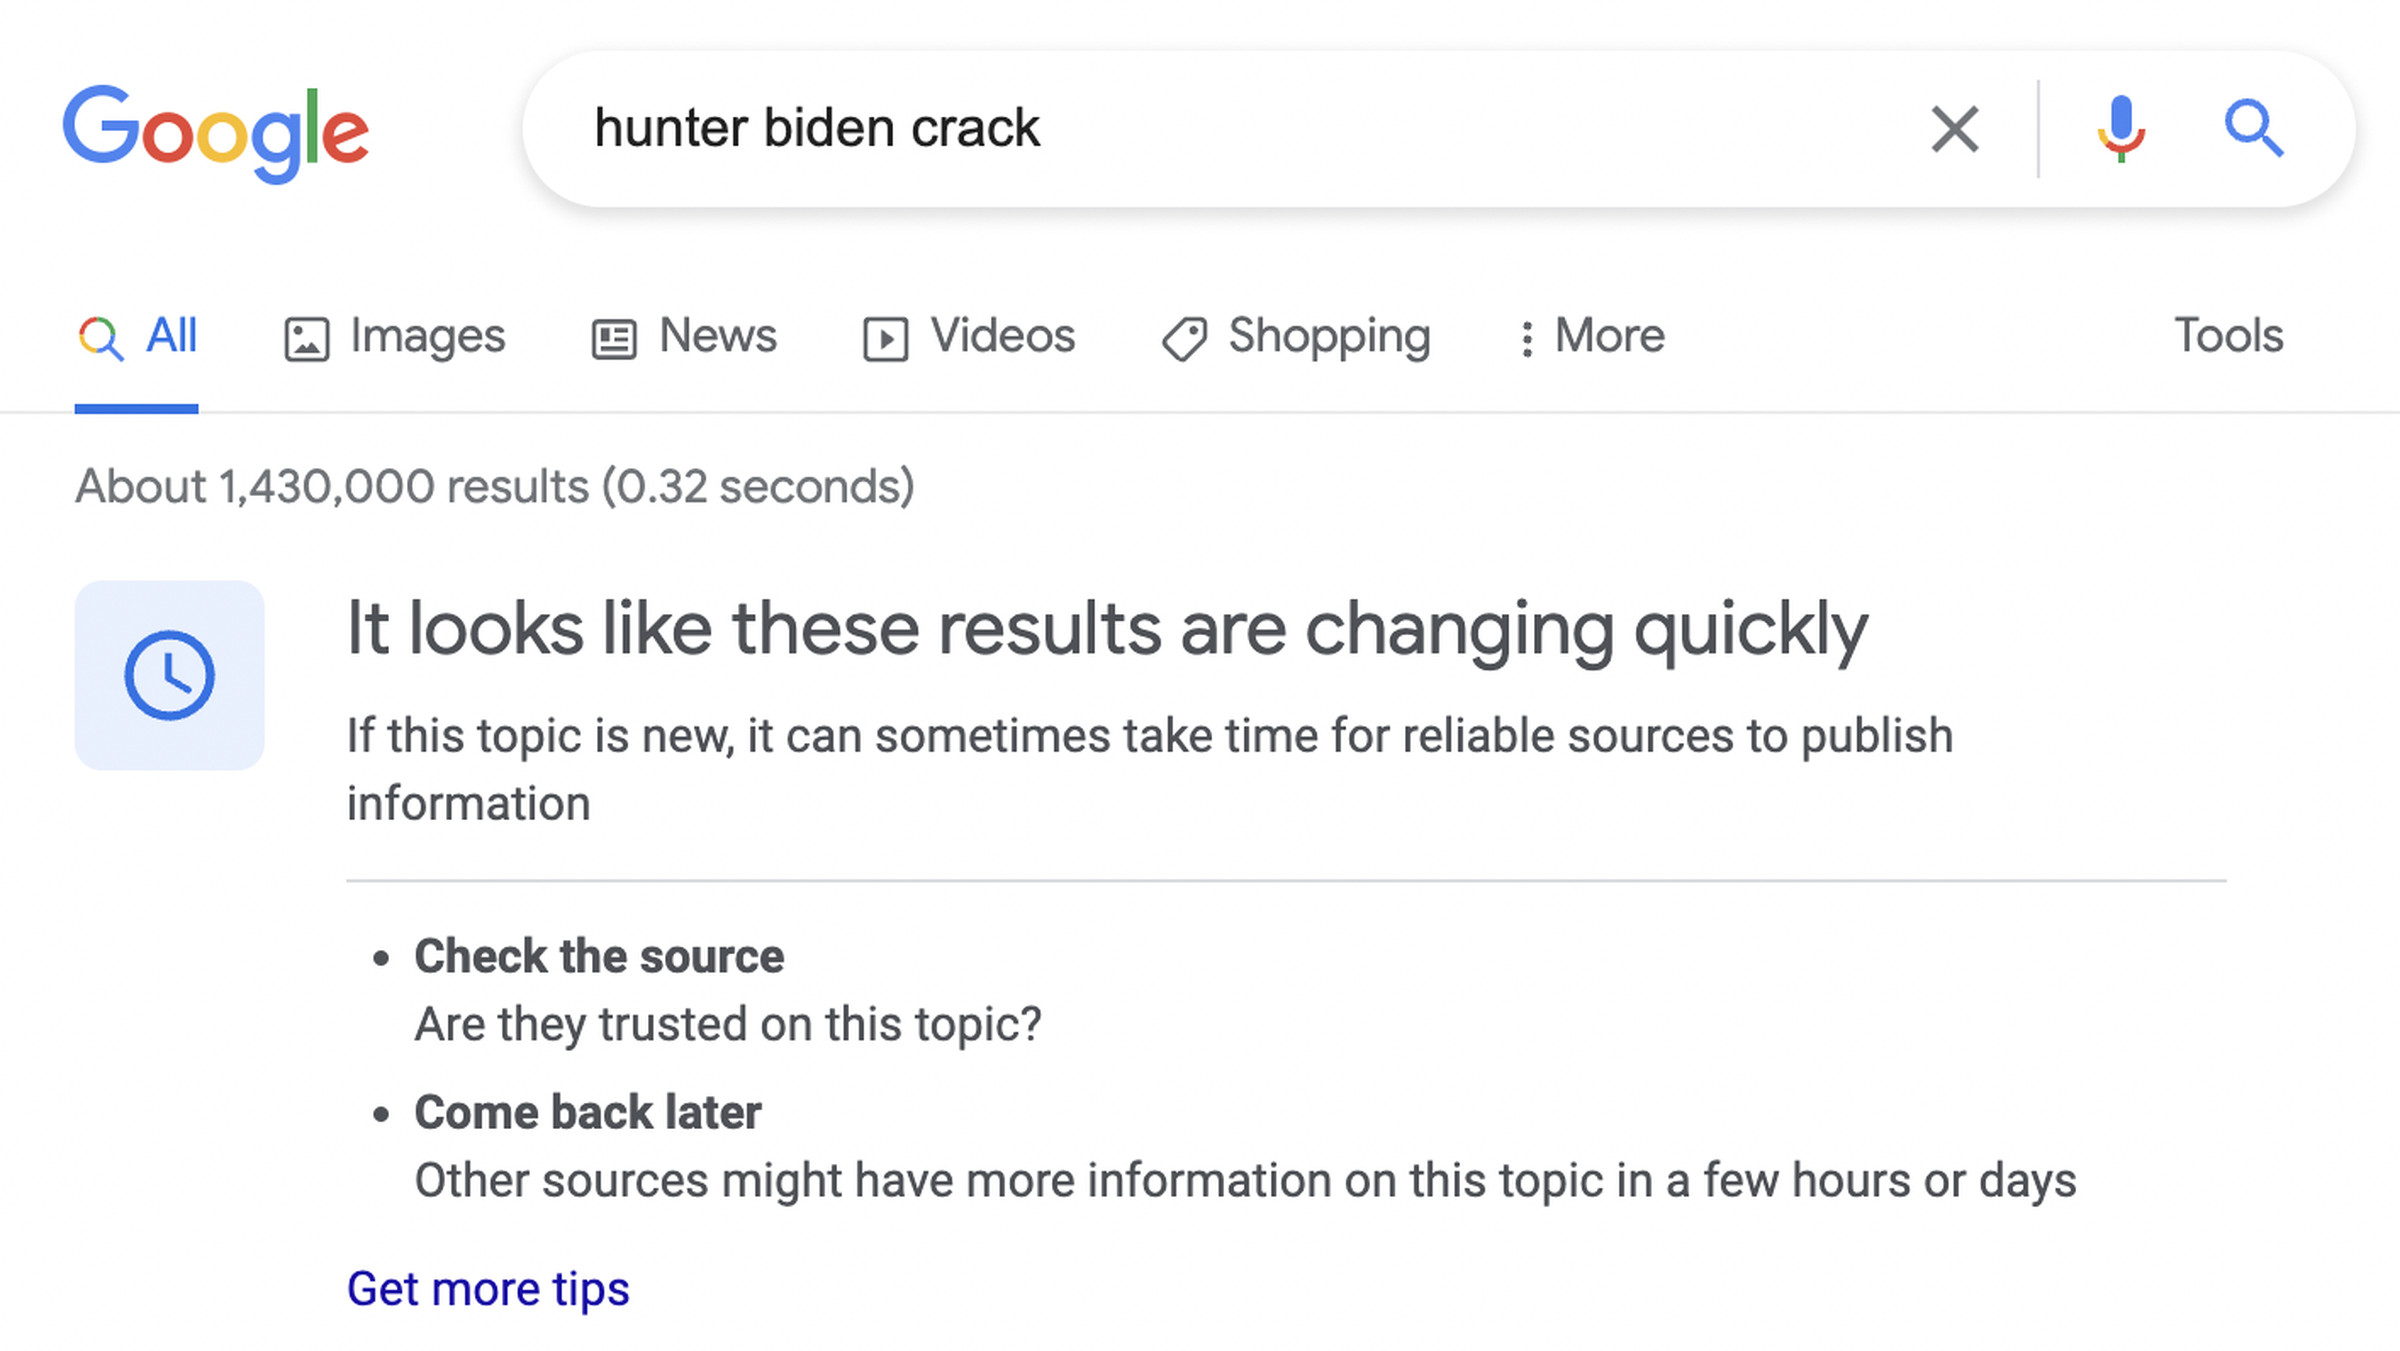 Search terms related to the leaked data returned a notice from Google about quickly changing results.